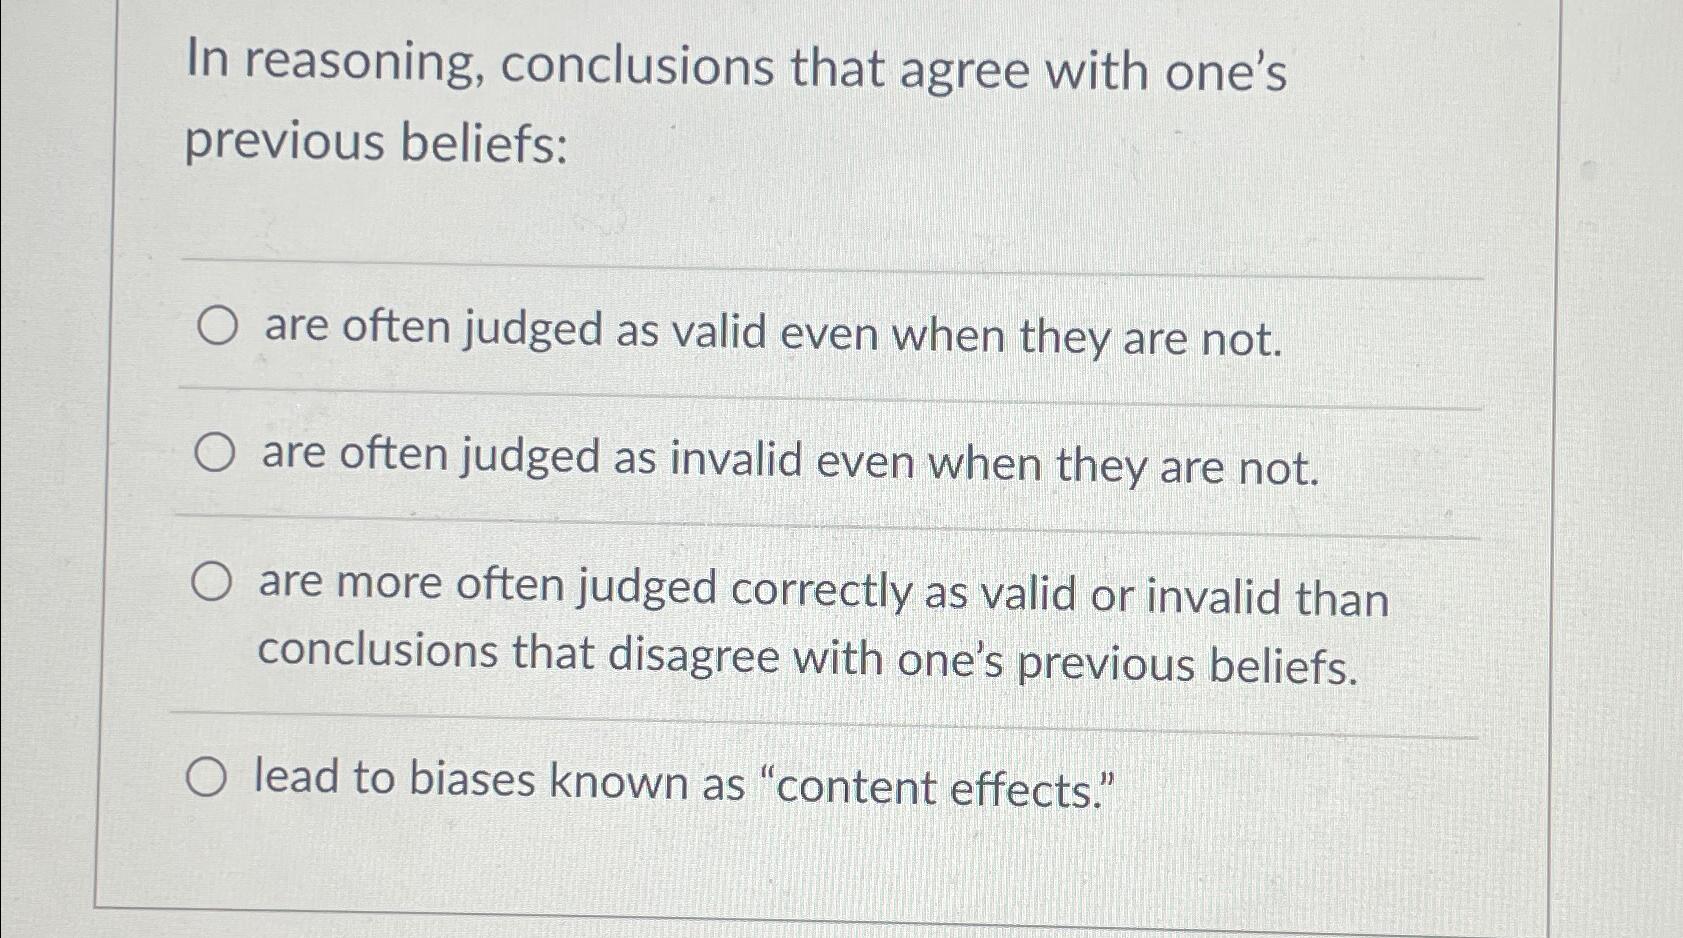 In reasoning, conclusions that agree with one's previous beliefs: O are often judged as valid even when they